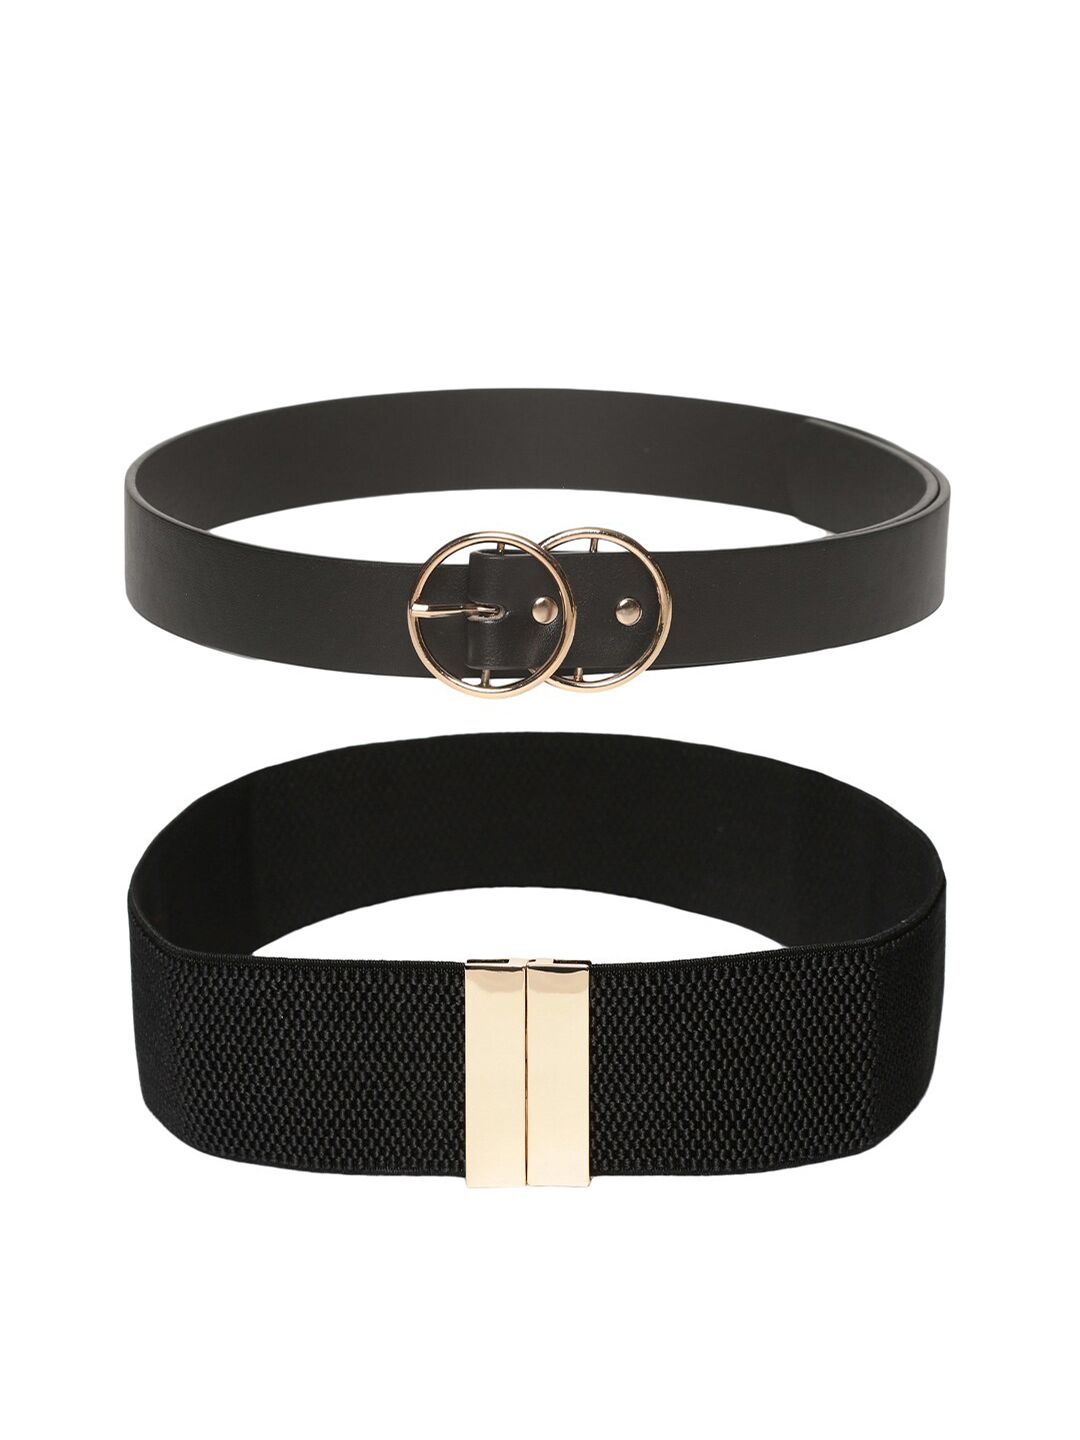 CRUSSET Women Pack of 2 Black Belts Price in India